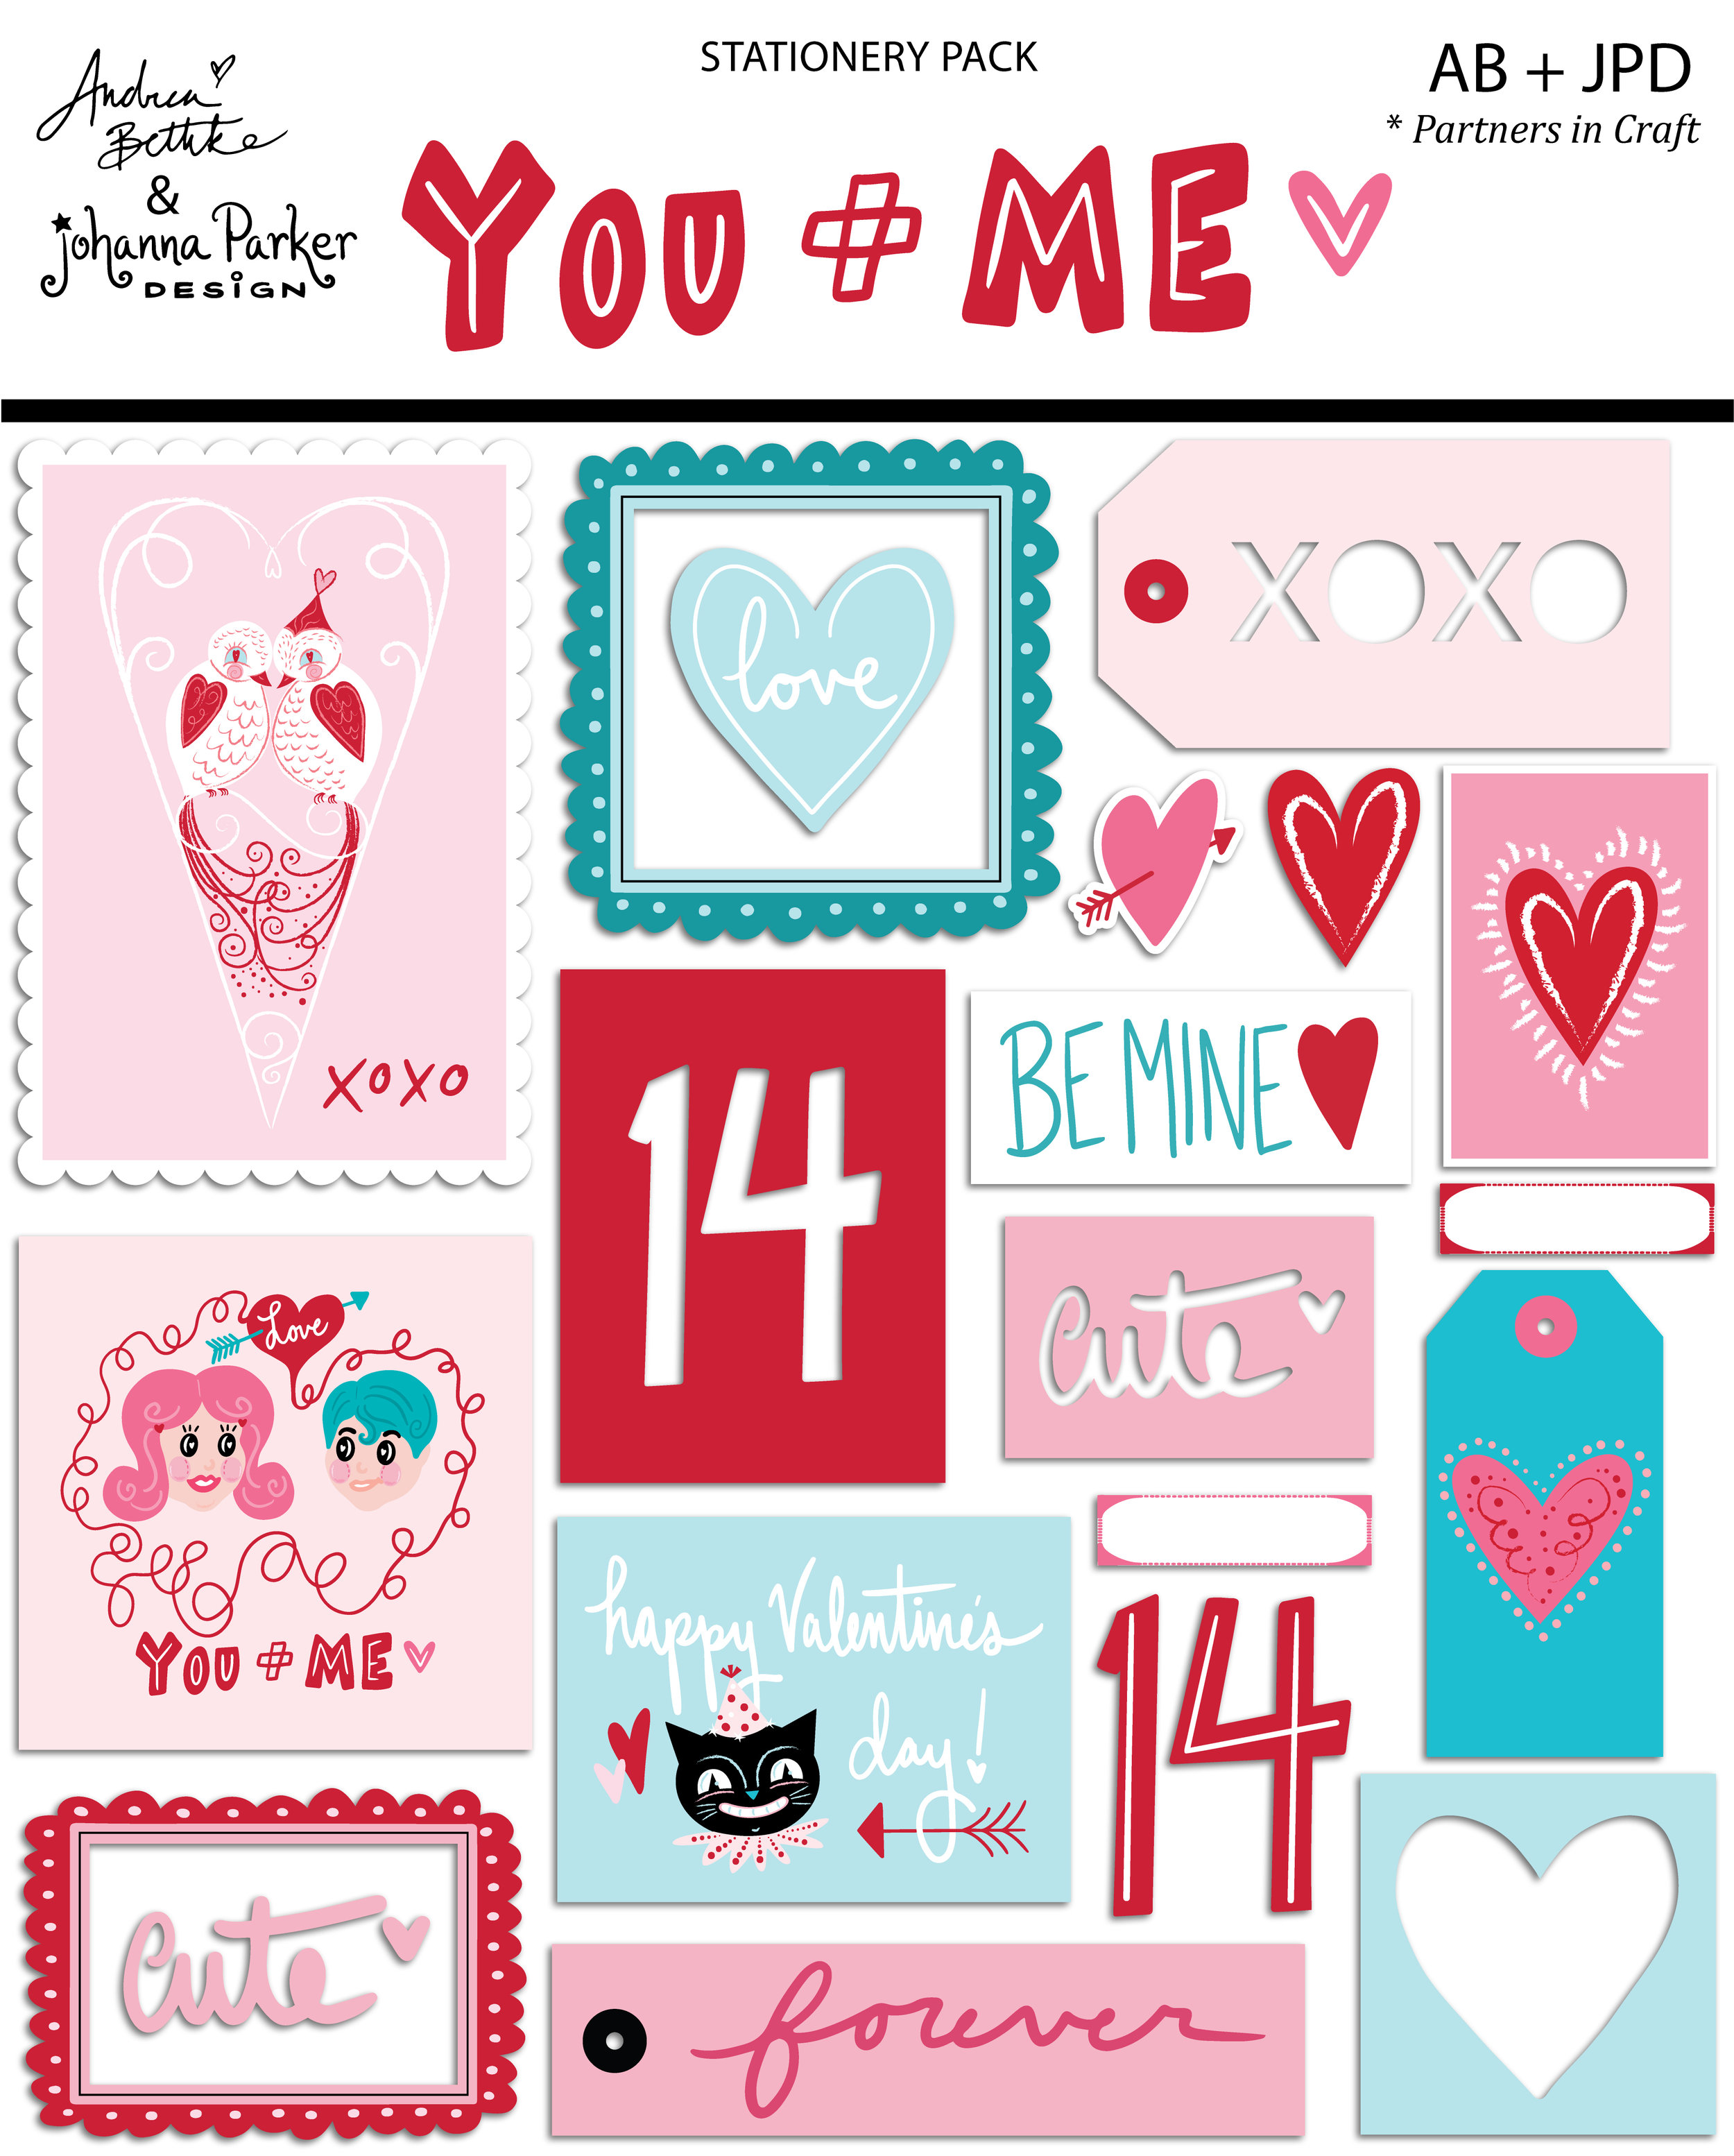 You + Me - Stationery with packaging.jpg